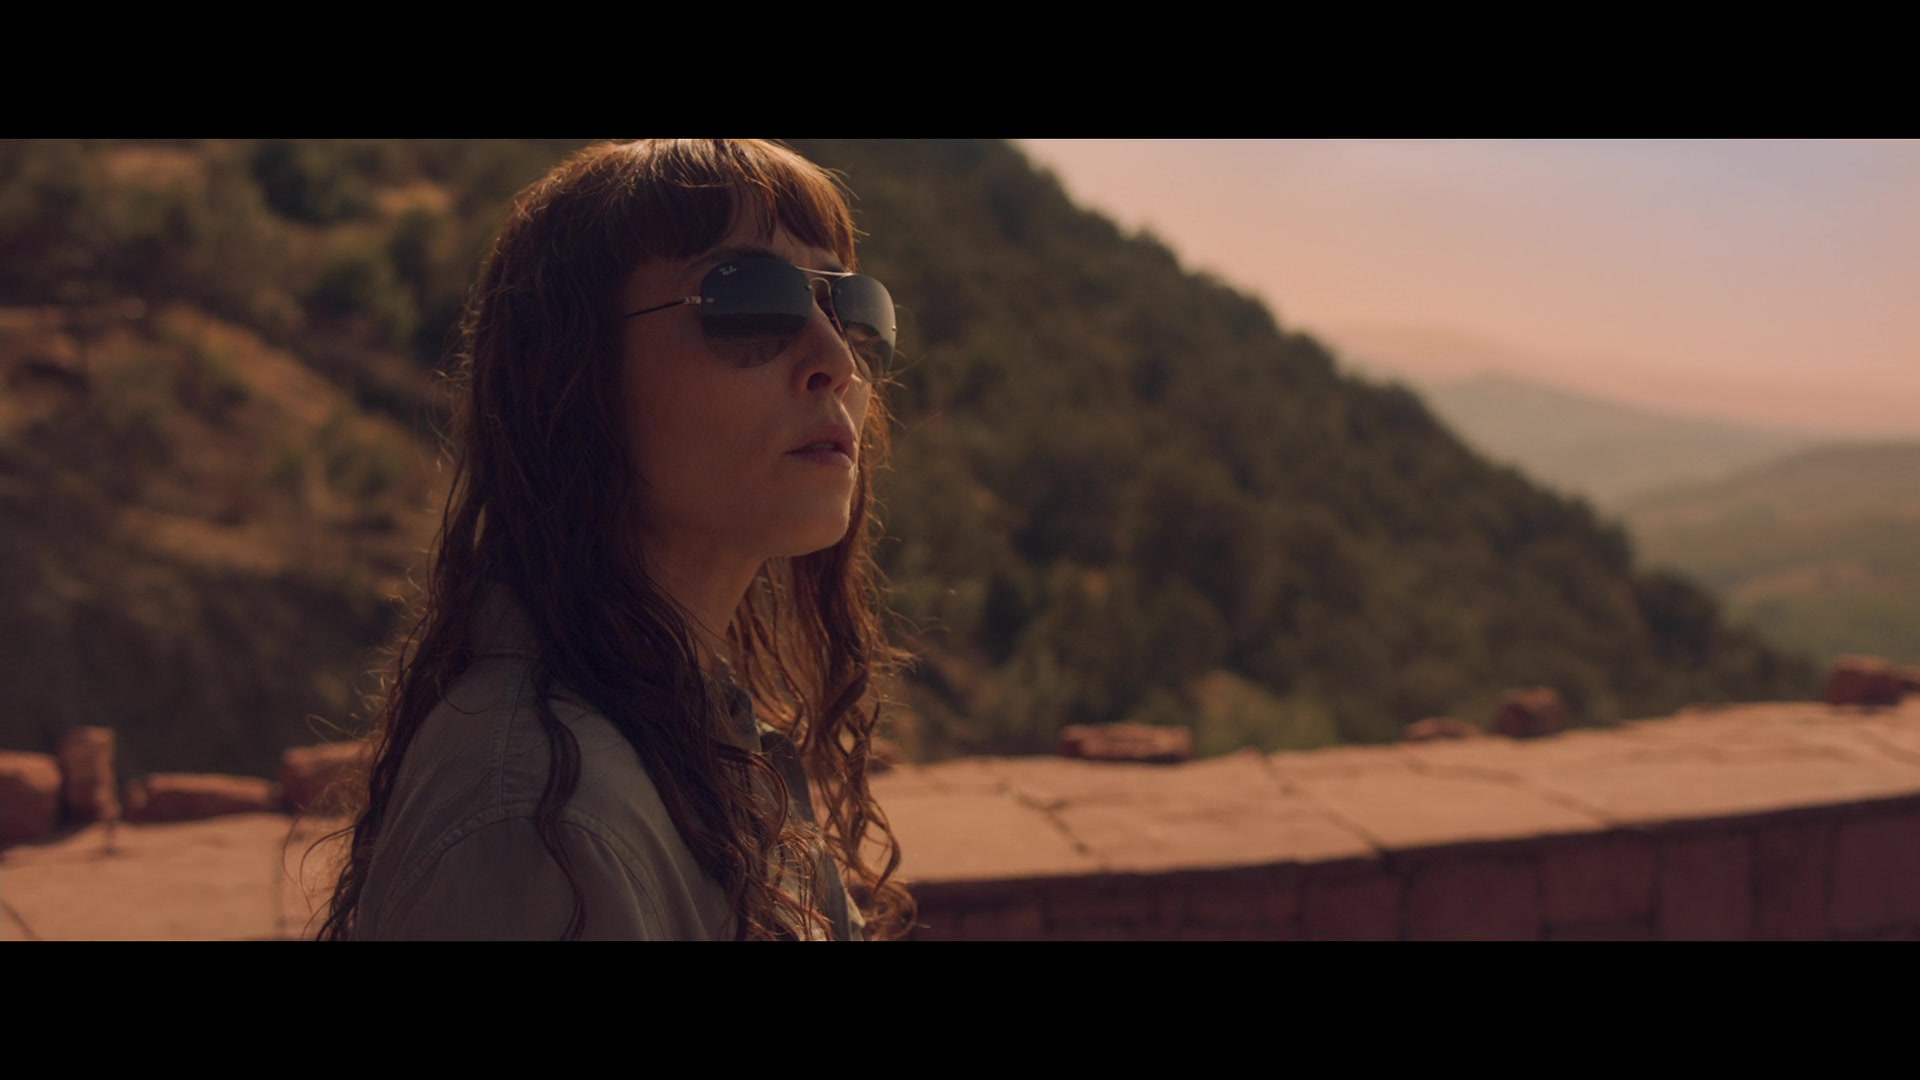 Ray-Ban Women's Sunglasses Worn by Noomi Rapace in Close (2019) Movie